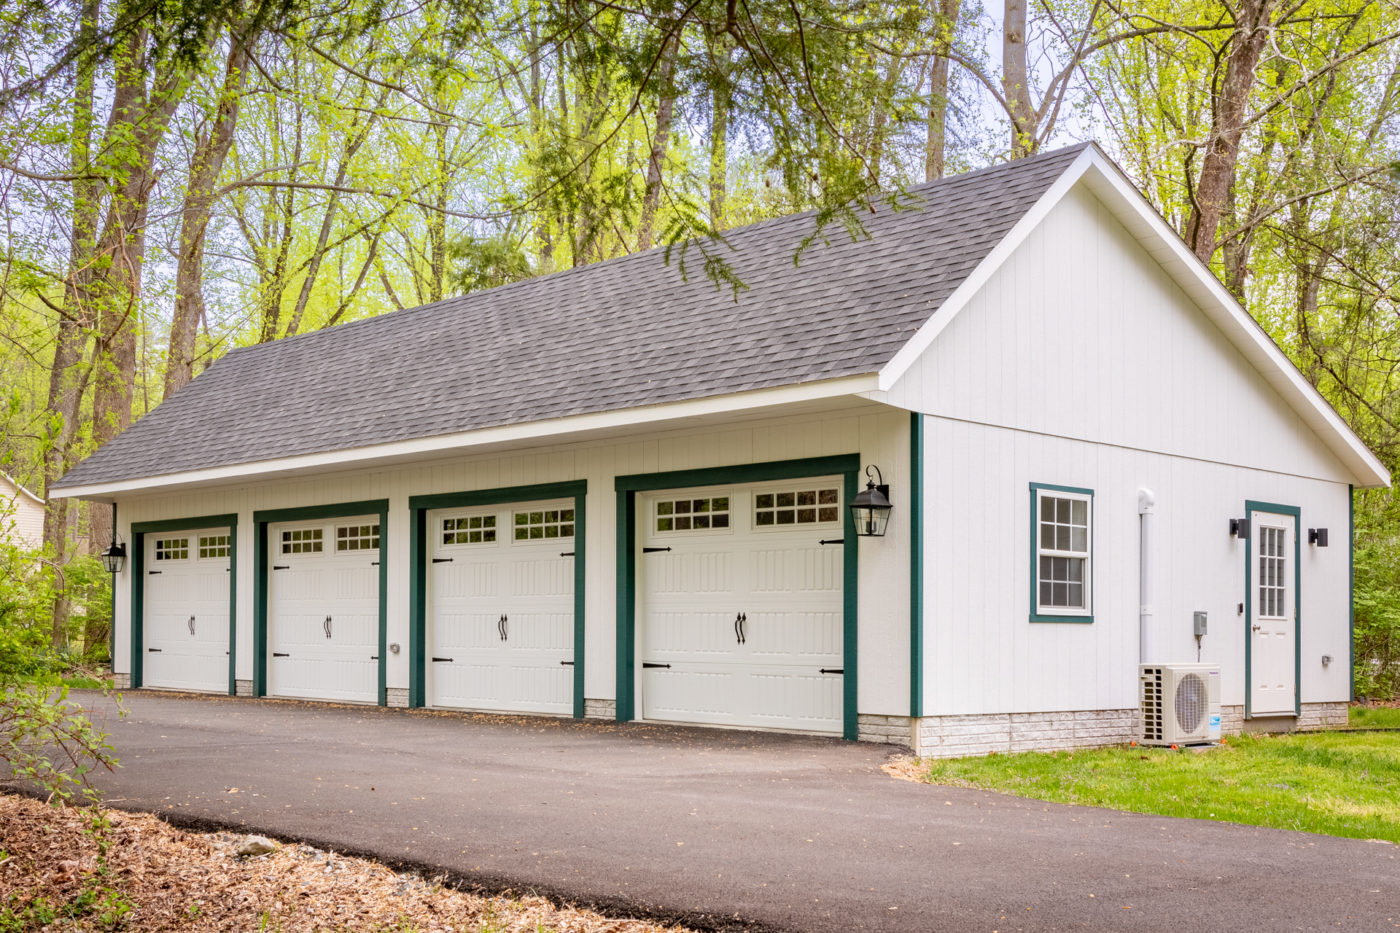 A four-car garage for sale from Sheds Unlimited